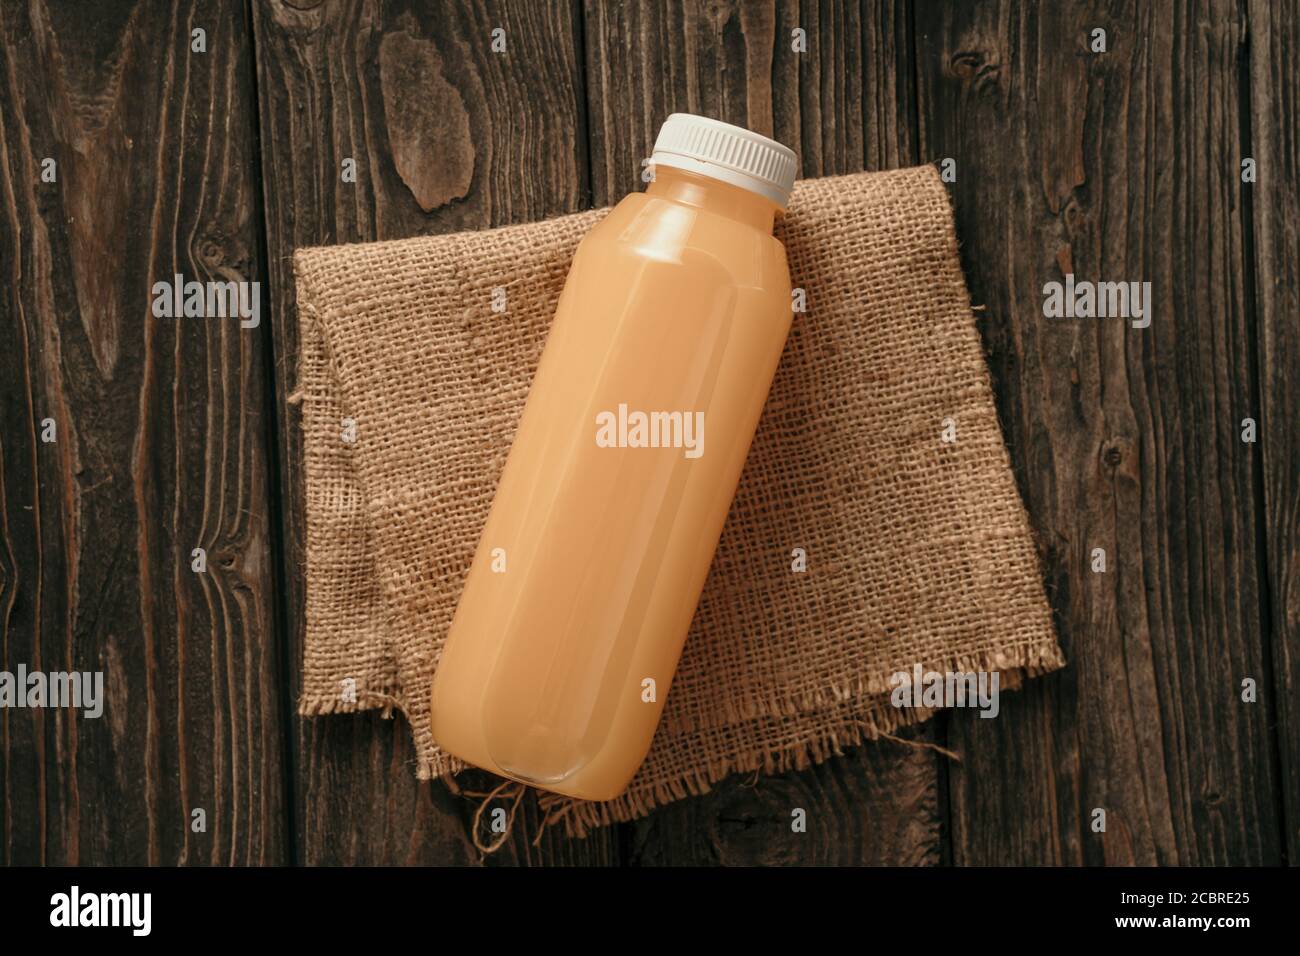 Download Real Photo Mockup Of Coffee Product On Plastic Bottle Stock Photo Alamy